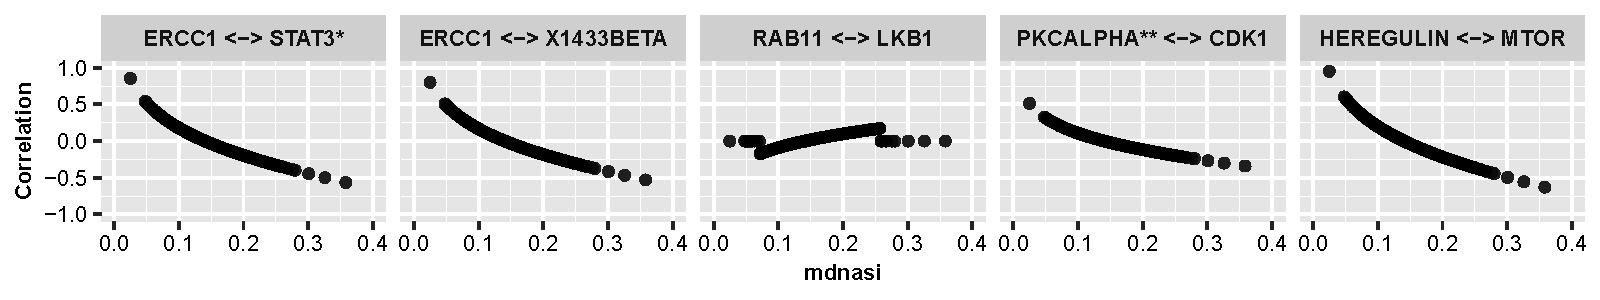 Line plots of selected protein pairs showing changes of correlation along with mDNAsi of the original scale.